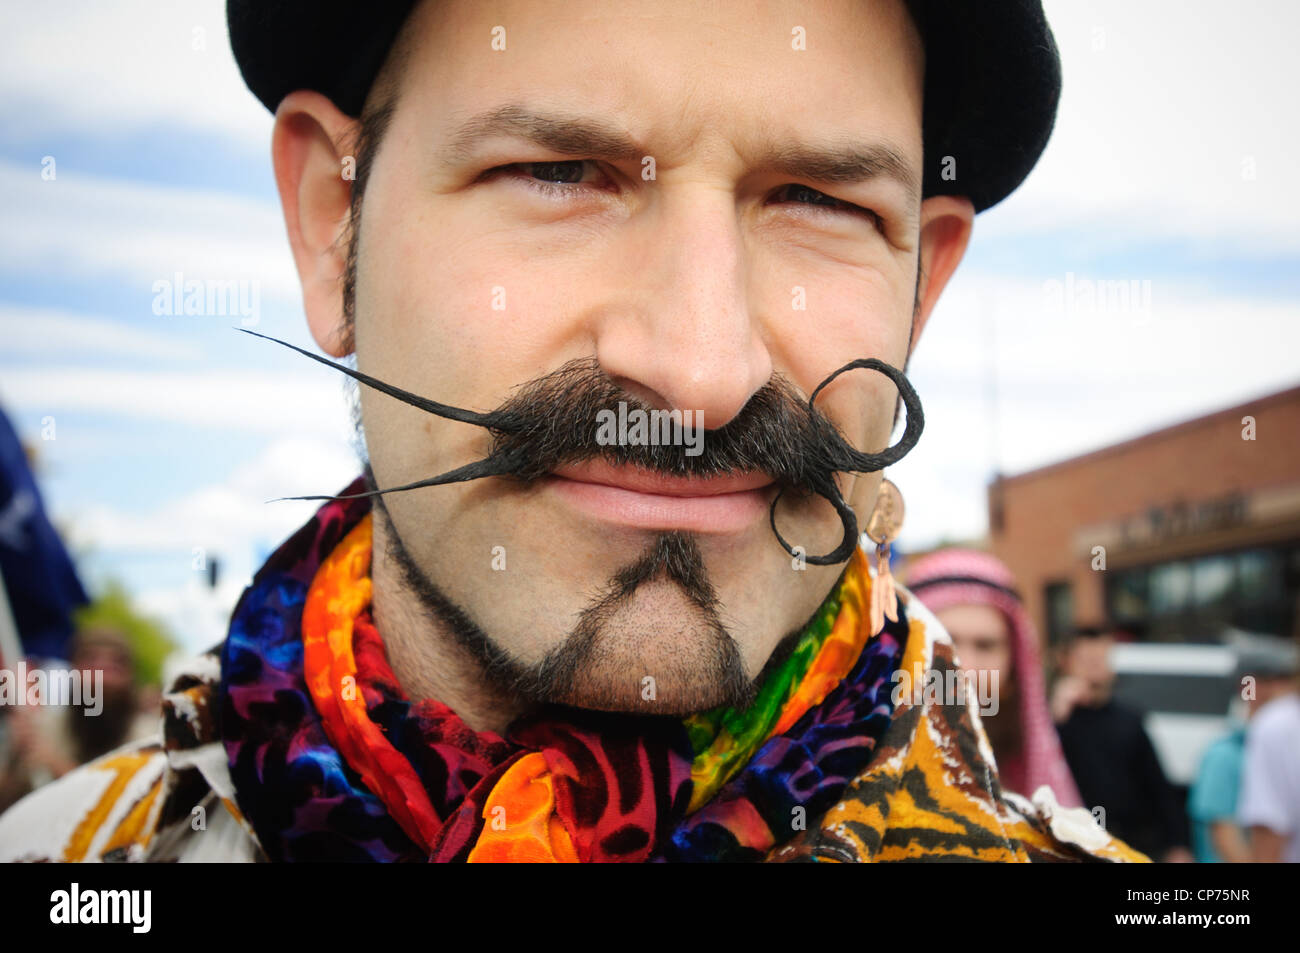 Competitor with his moustache styled as "scissors," at the 2010 USA National Beard and Moustache Championships in Bend, OR, USA. Stock Photo